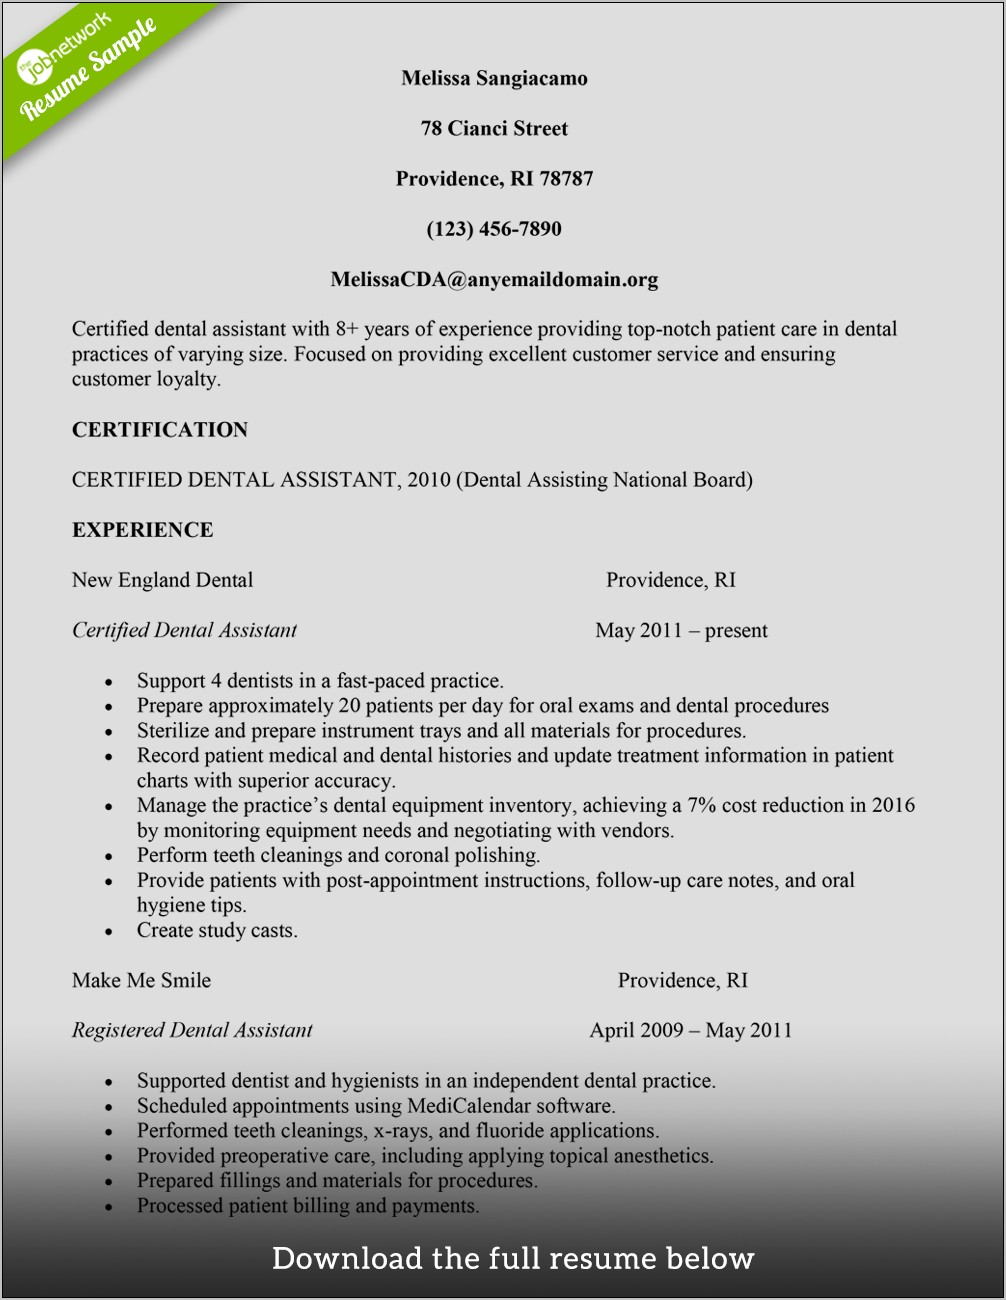 Resume Examples Dental Assistant